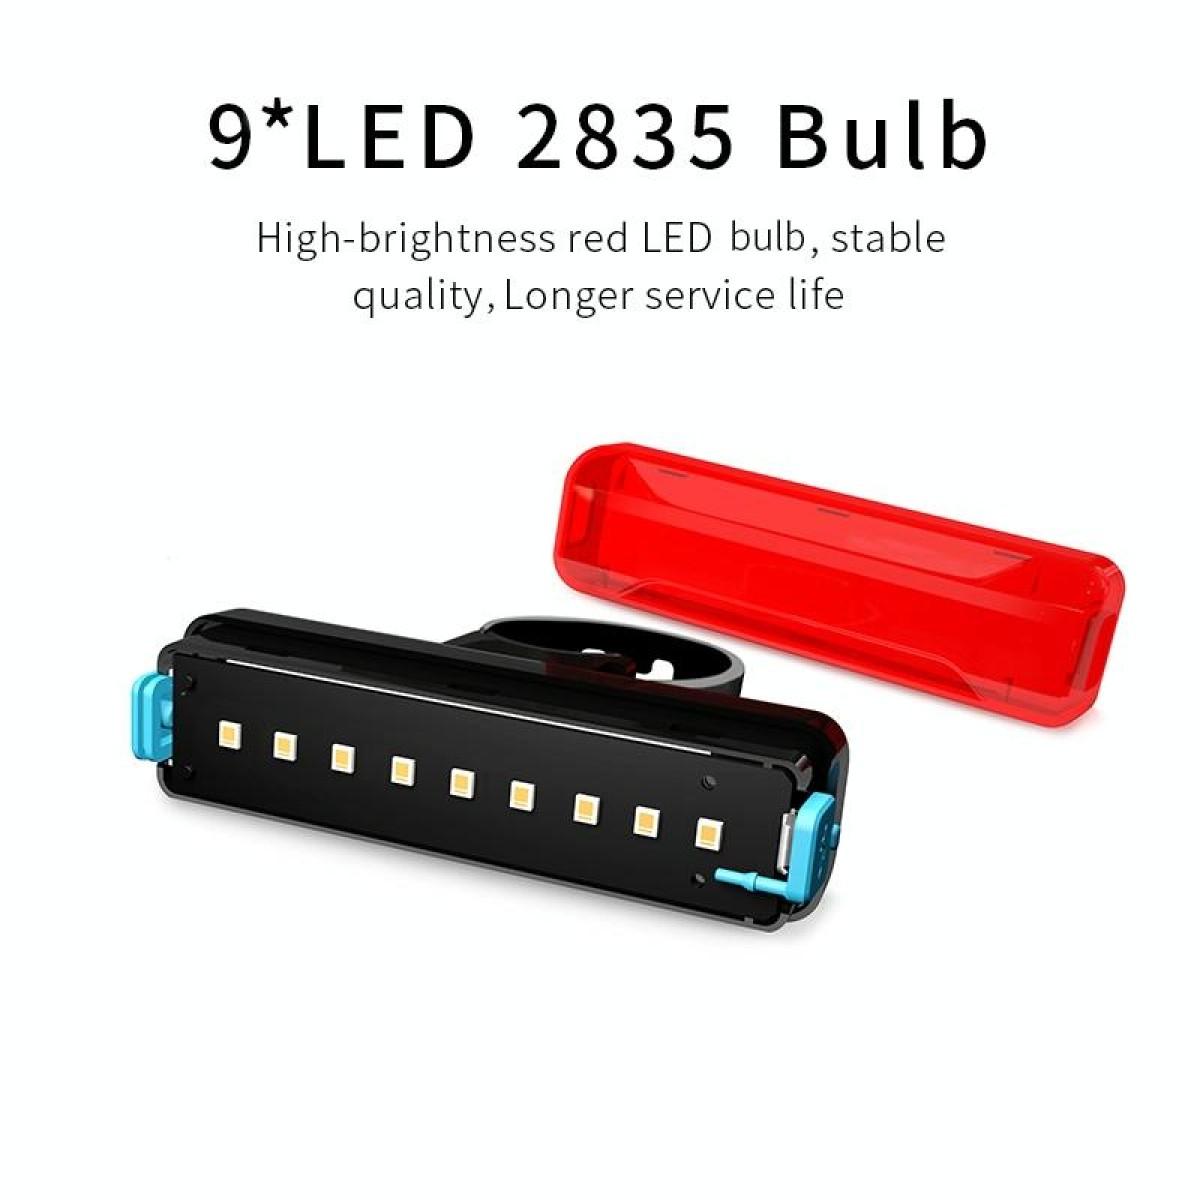 A02 Bicycle Taillight Bicycle Riding Motorcycle Electric Car LED Mountain Bike USB Charging Safety Warning Light (6 Hours, Color Box)